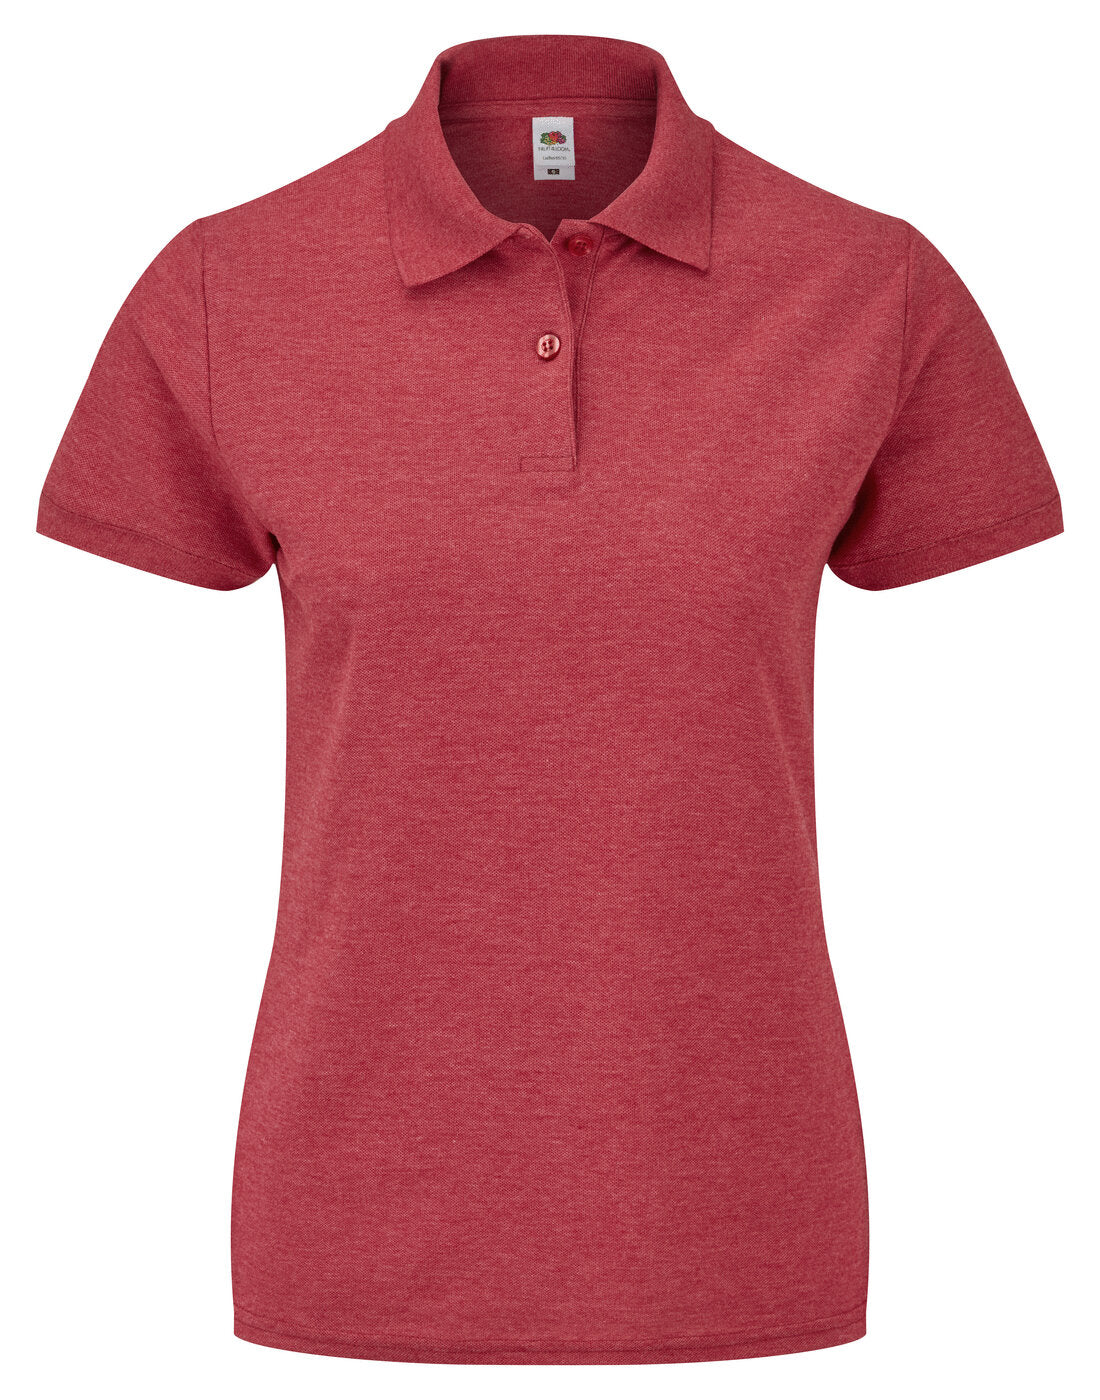 Fruit of the Loom Ladies 65/35 Polo - Vintage Heather Red